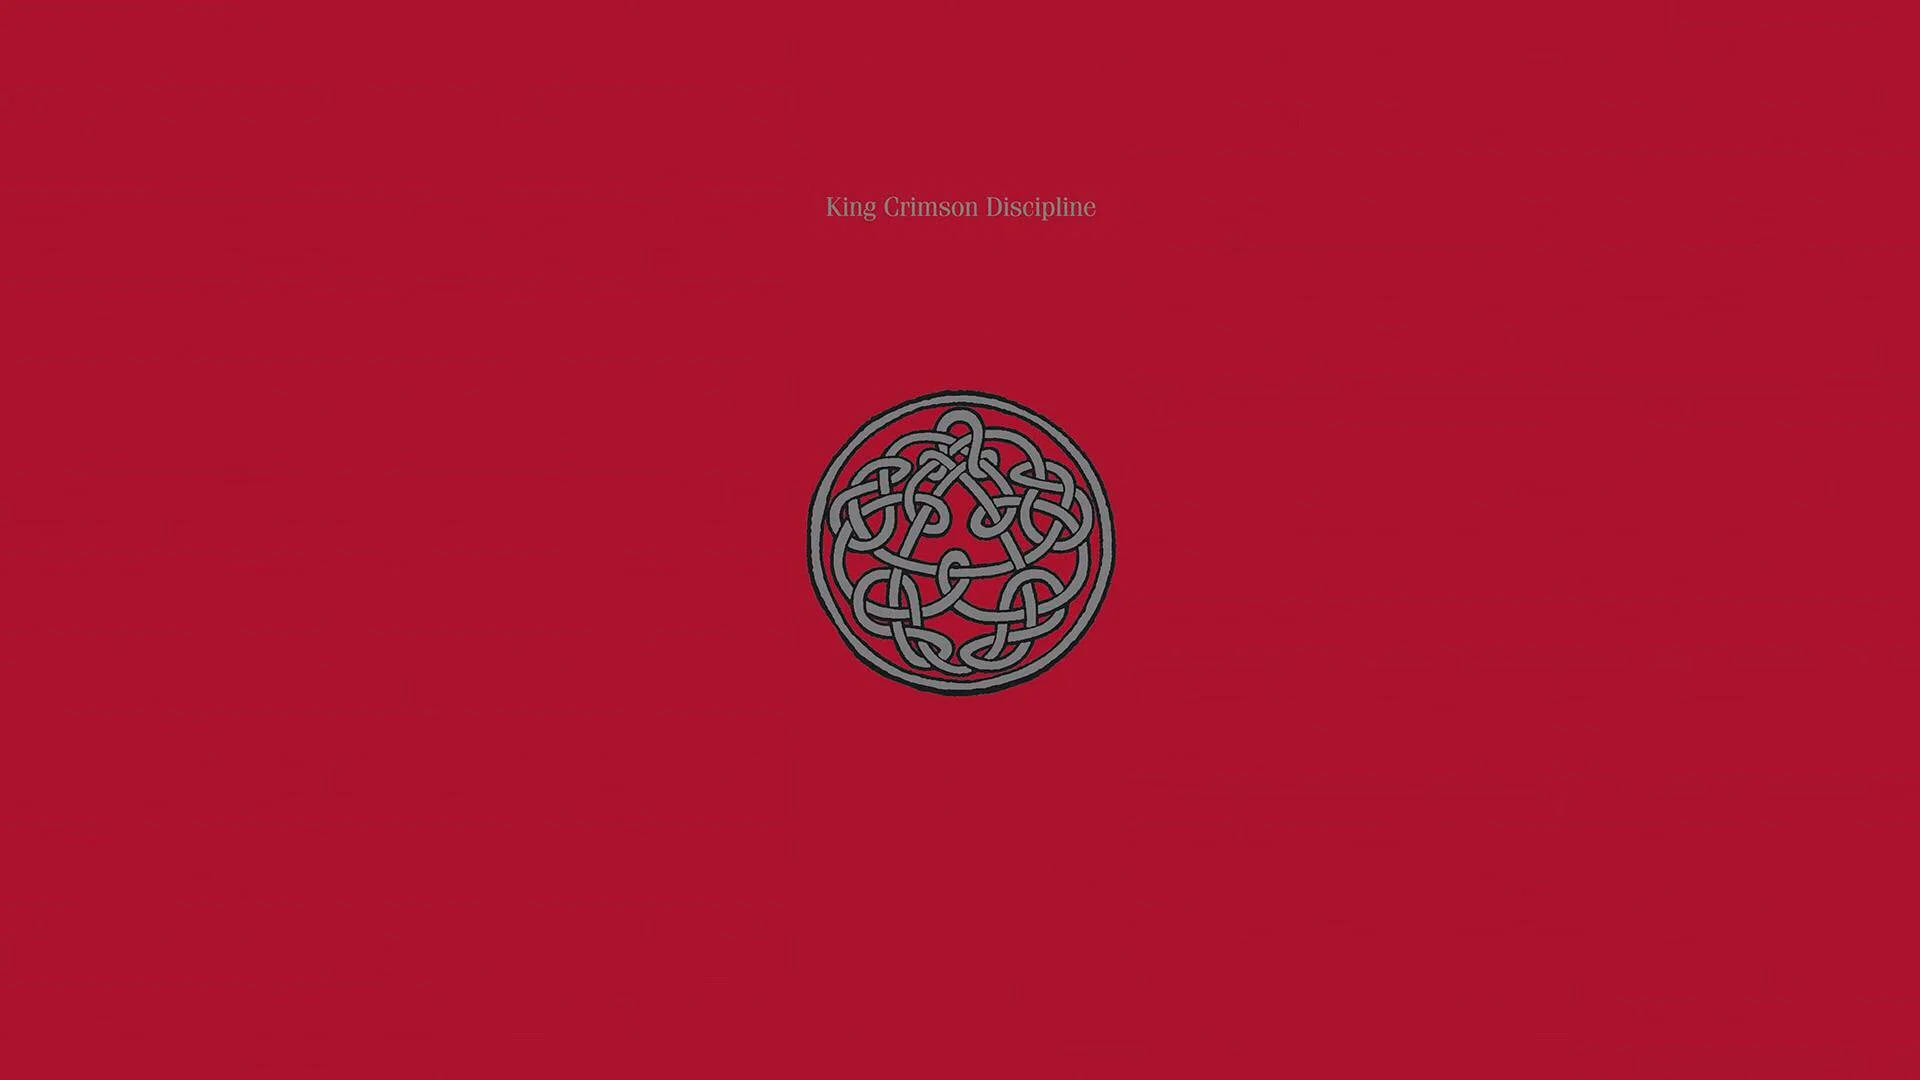 I made a king crimson wallpaper for the iPhone because of how much I love  it feel free to download it crimson fans  rKingCrimson